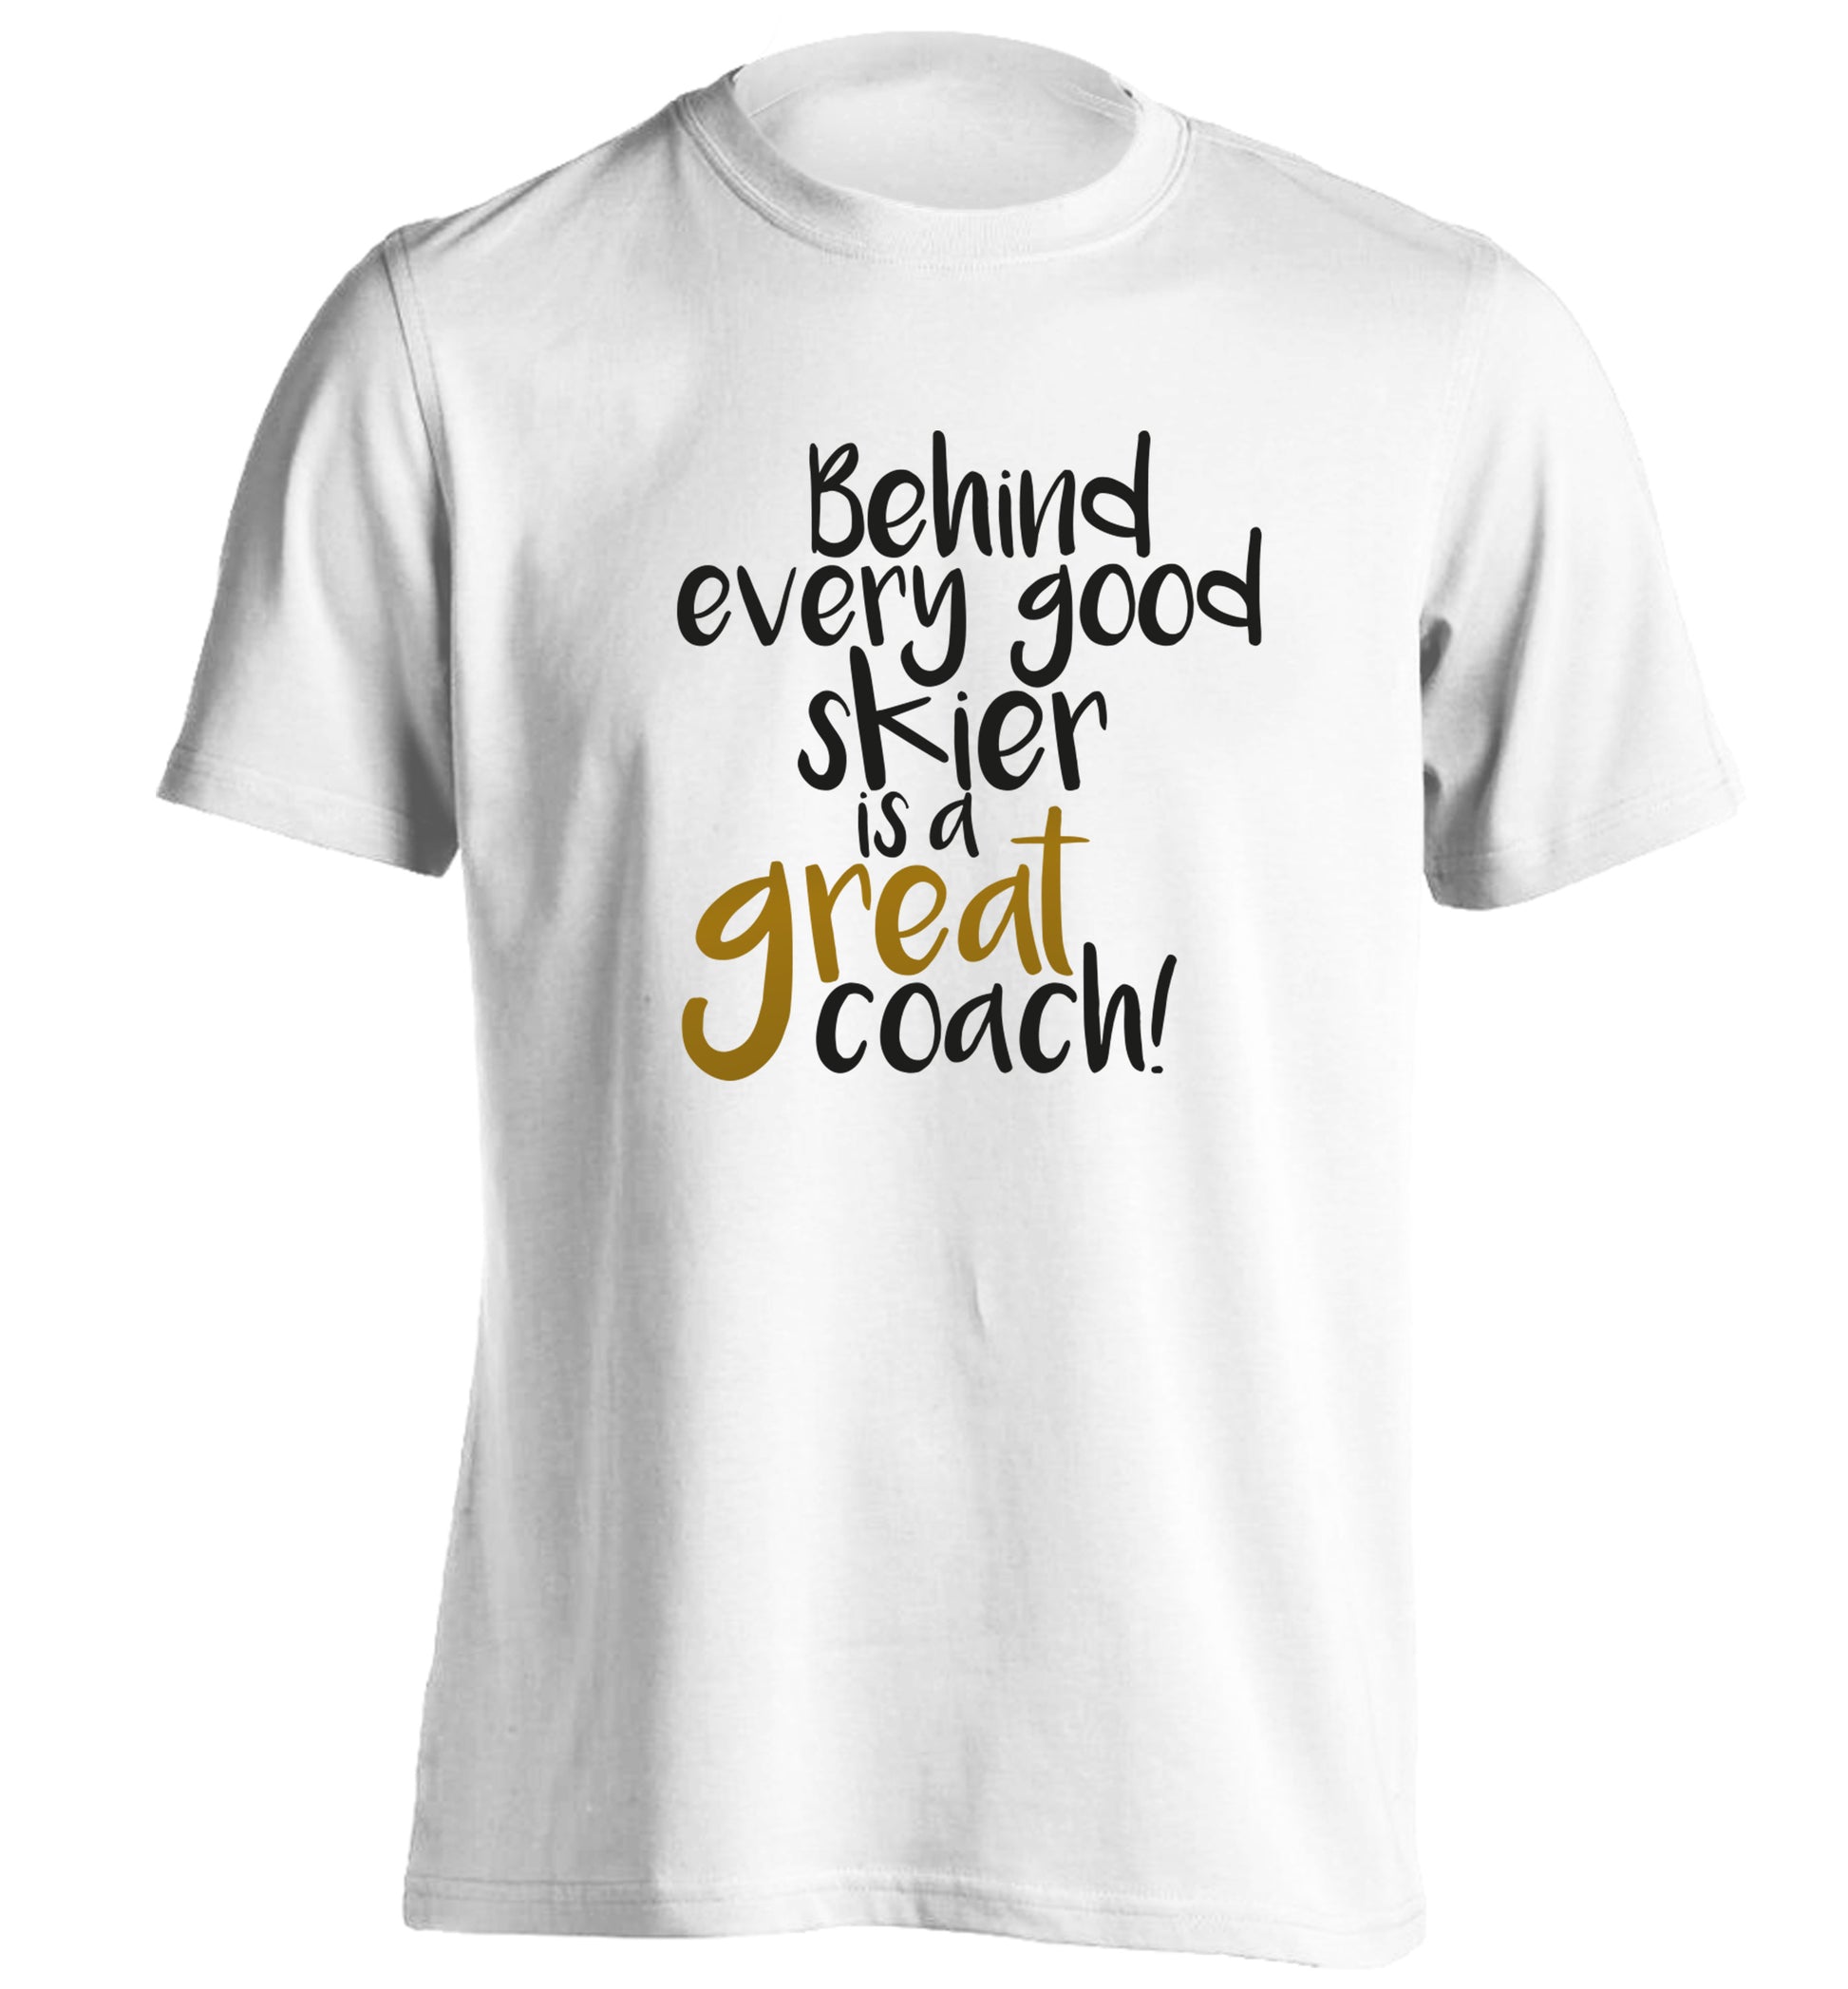 Behind every good skier is a great coach! adults unisexwhite Tshirt 2XL